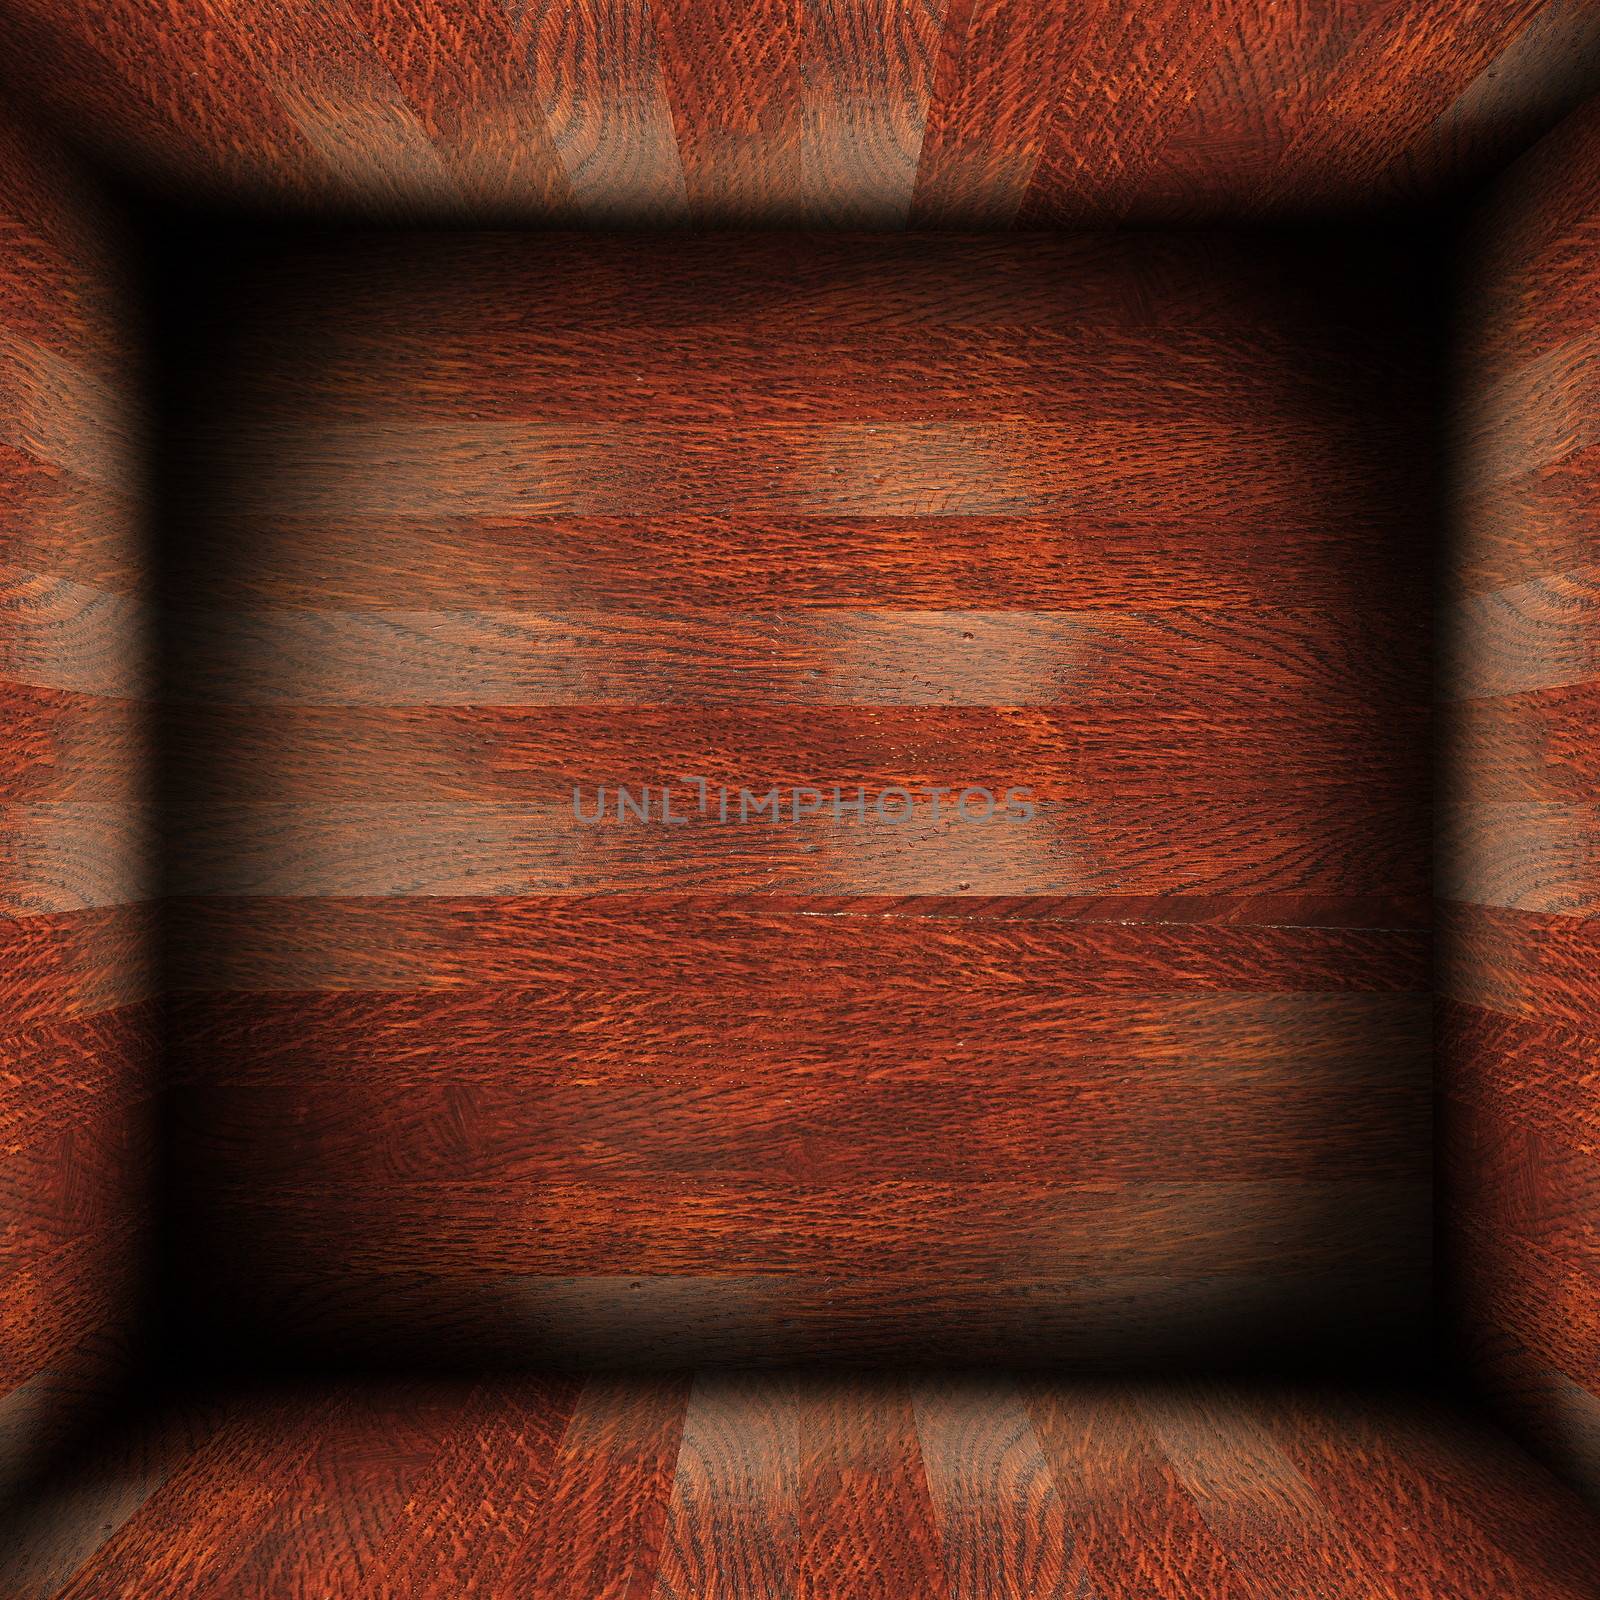 abstract wood finished interior by taviphoto